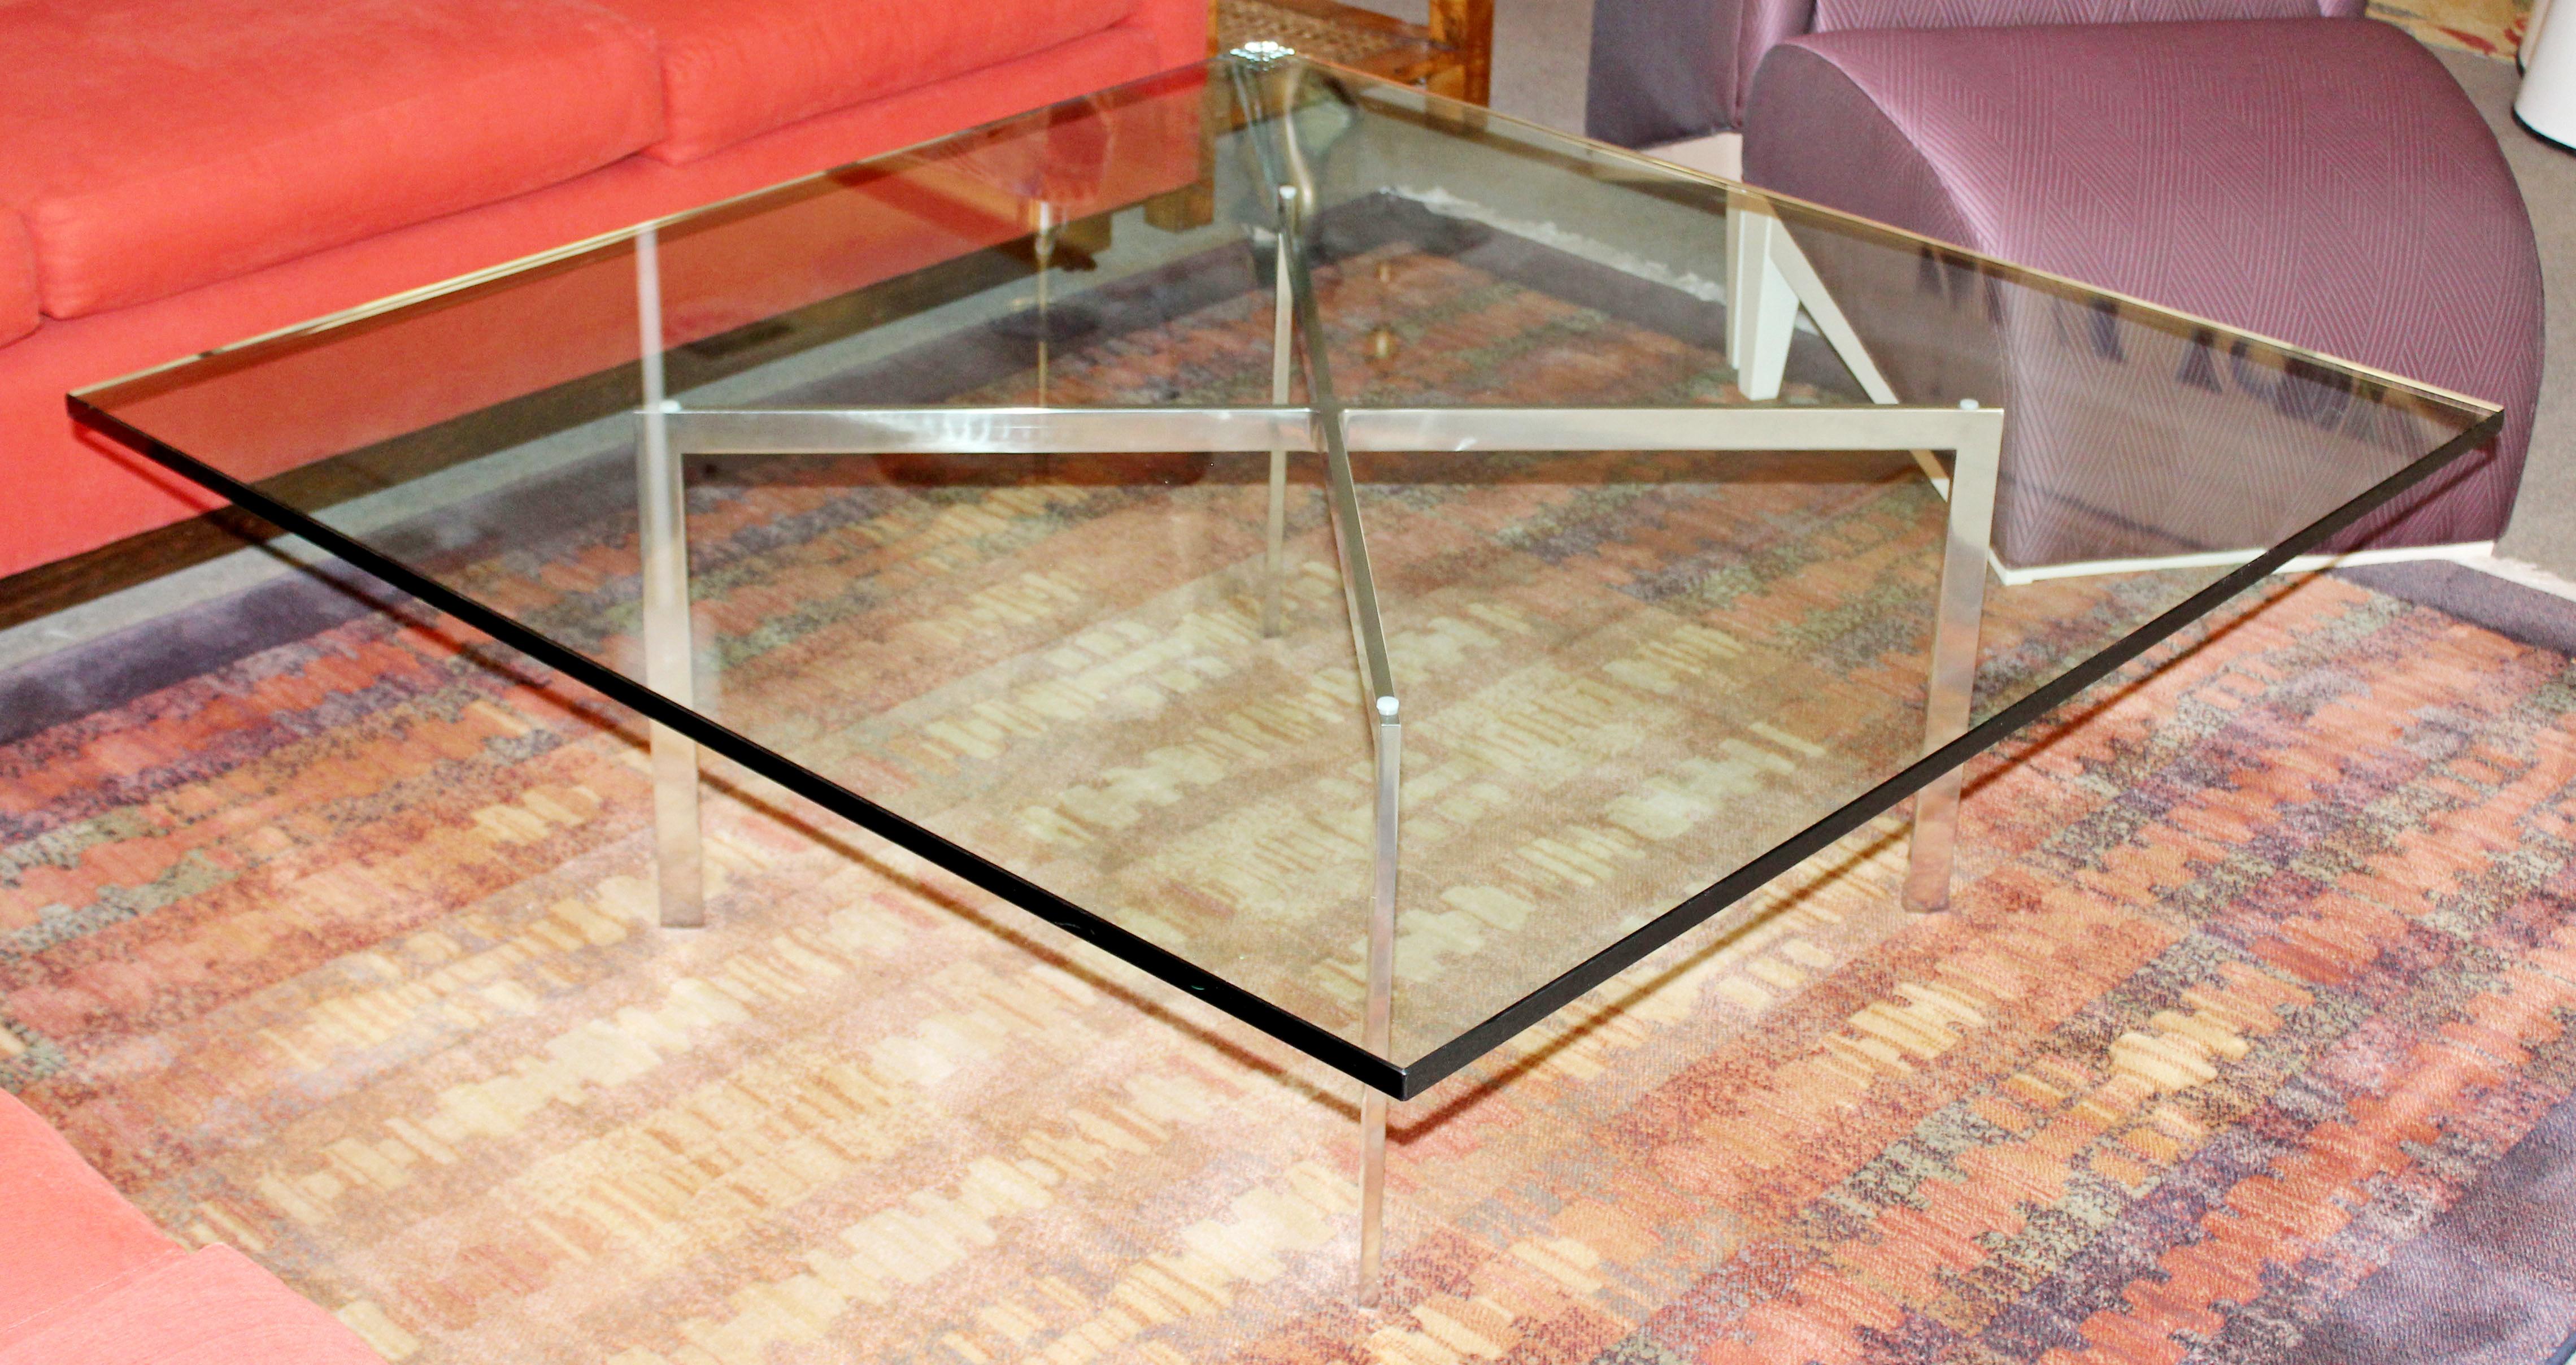 For your consideration is an original Barcelona coffee table, with a square glass top on a stainless steel base, by Ludwig Mies van der Rohe for Knoll, circa 1970s. In very good condition, with some minor surface scratches on the glass. The